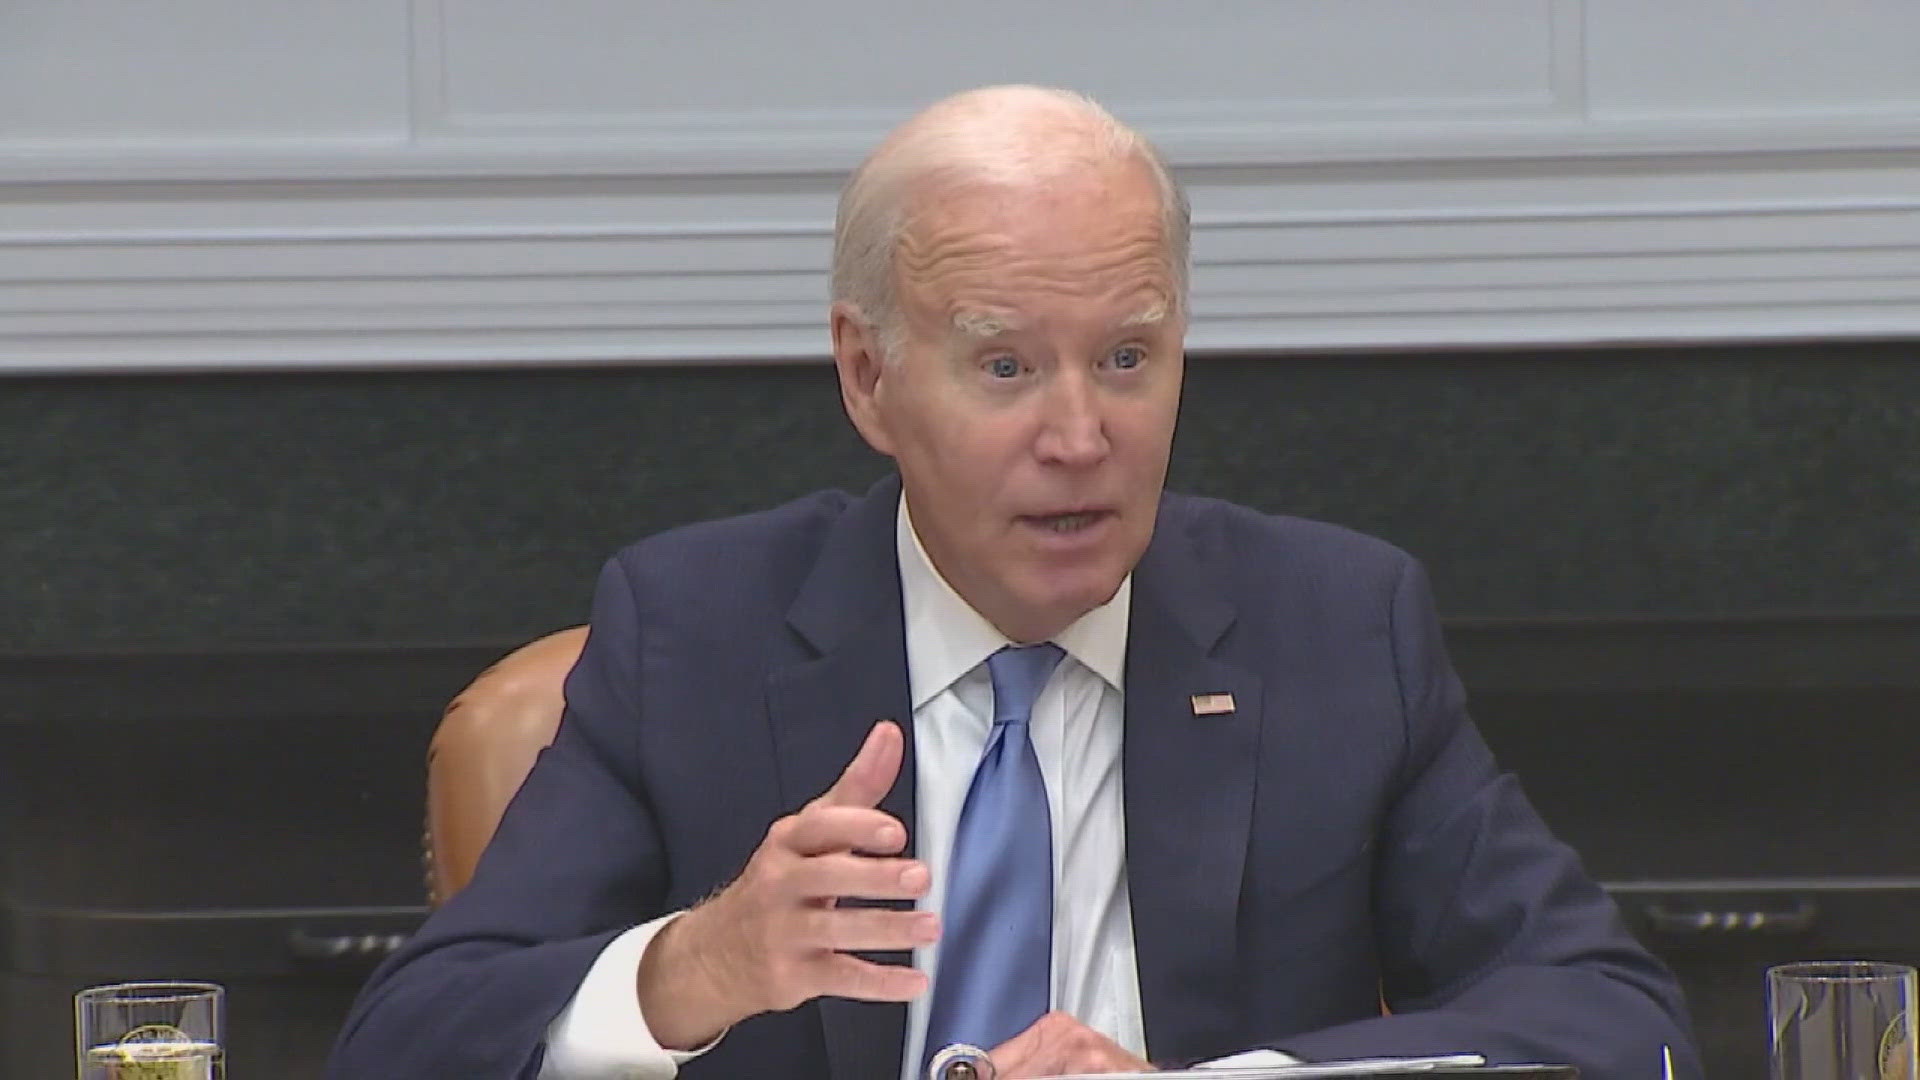 Despite the problems at the Statehouse, President Biden’s campaign is confident he will be on Ohio’s ballot for this fall's election.